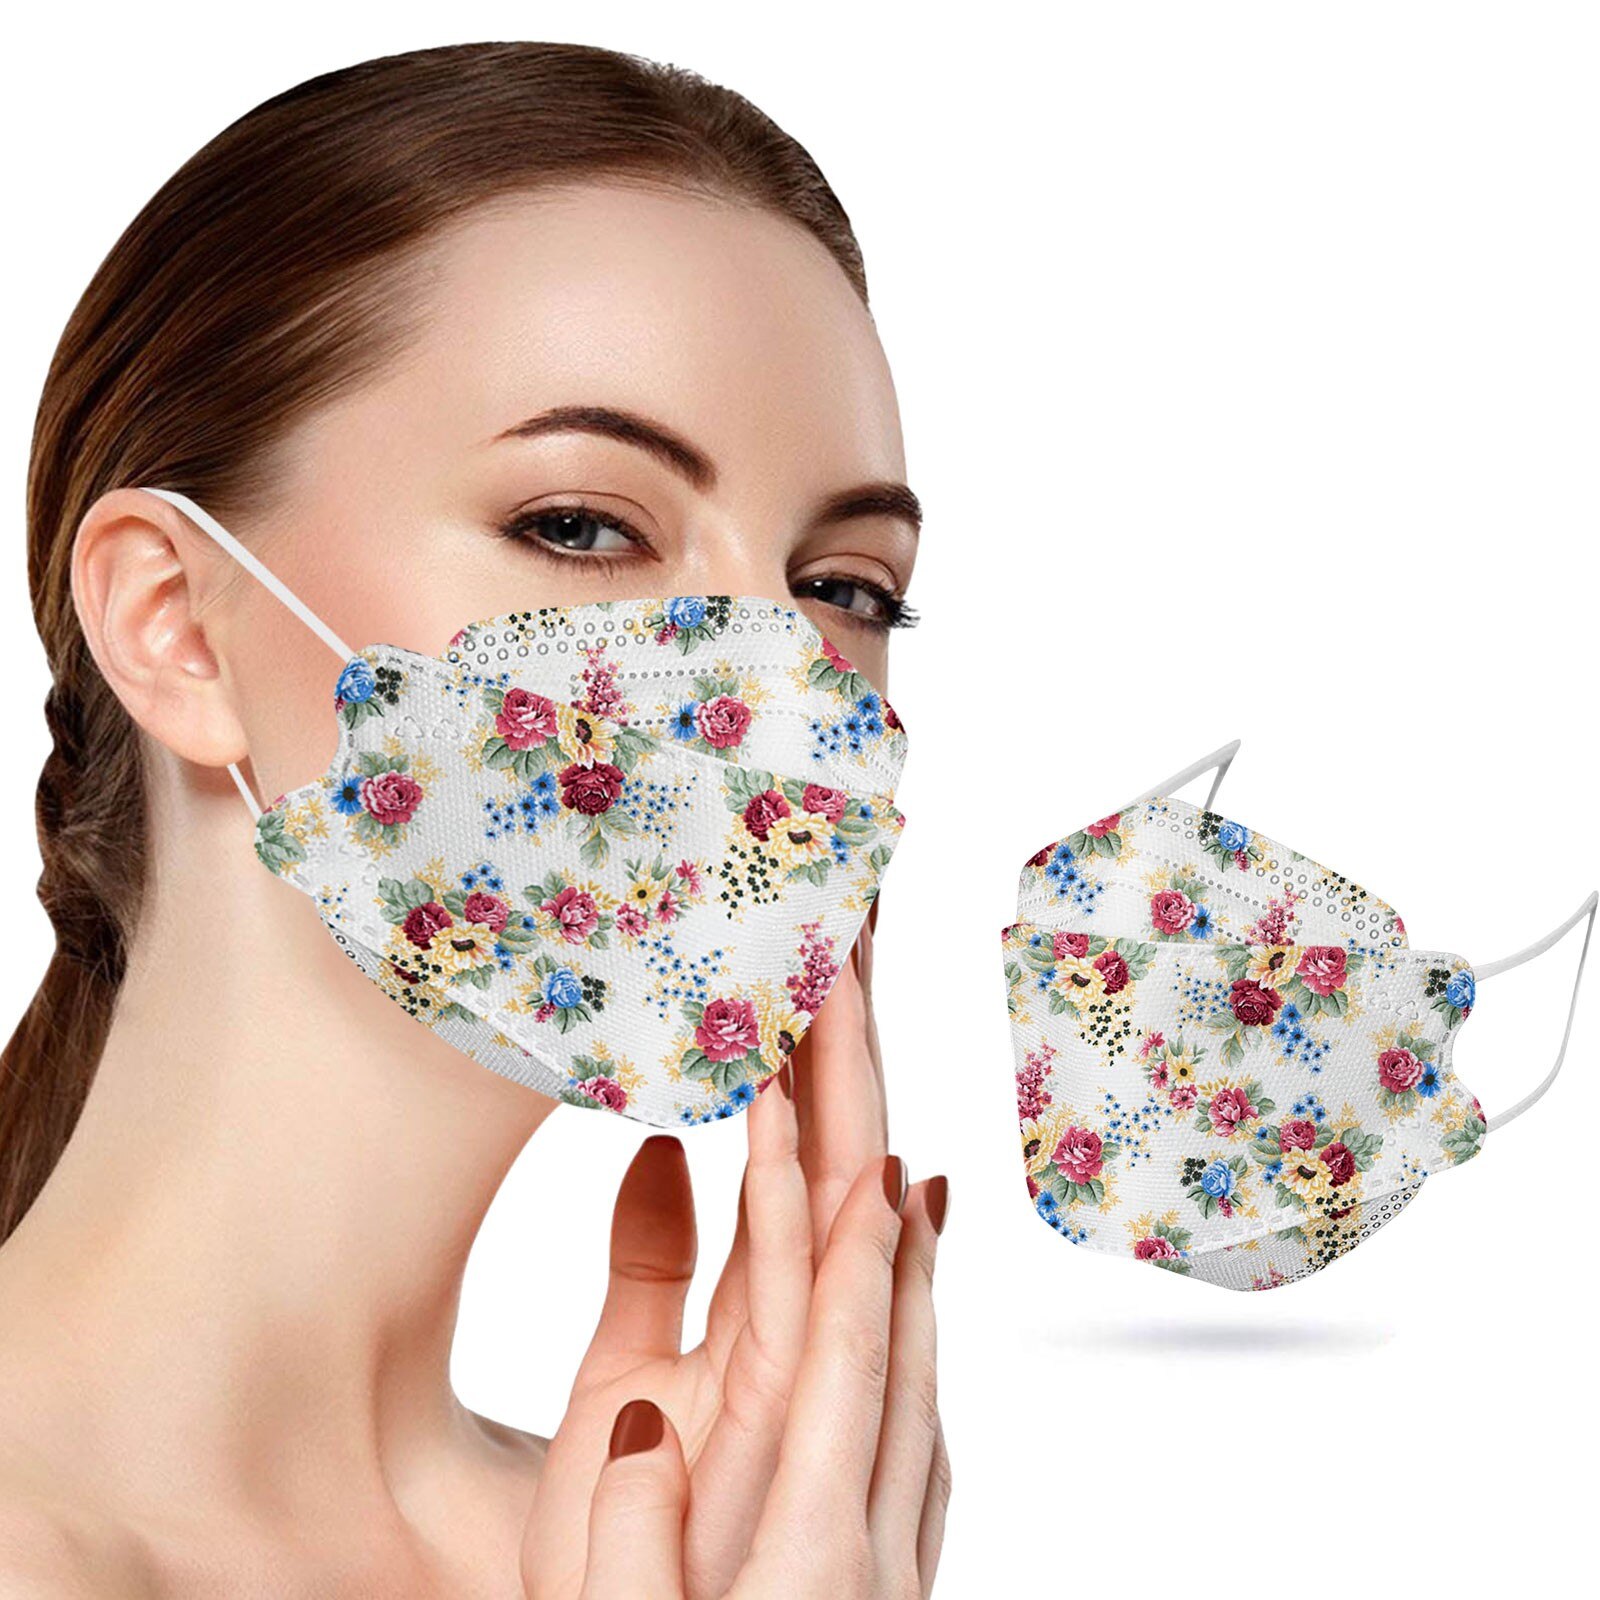 10PCS Flower Prints Mask face shield Masque Proof Protect Disposable Mask for Adults 4-Layer Ear Loop Mask Halloween Cosplay